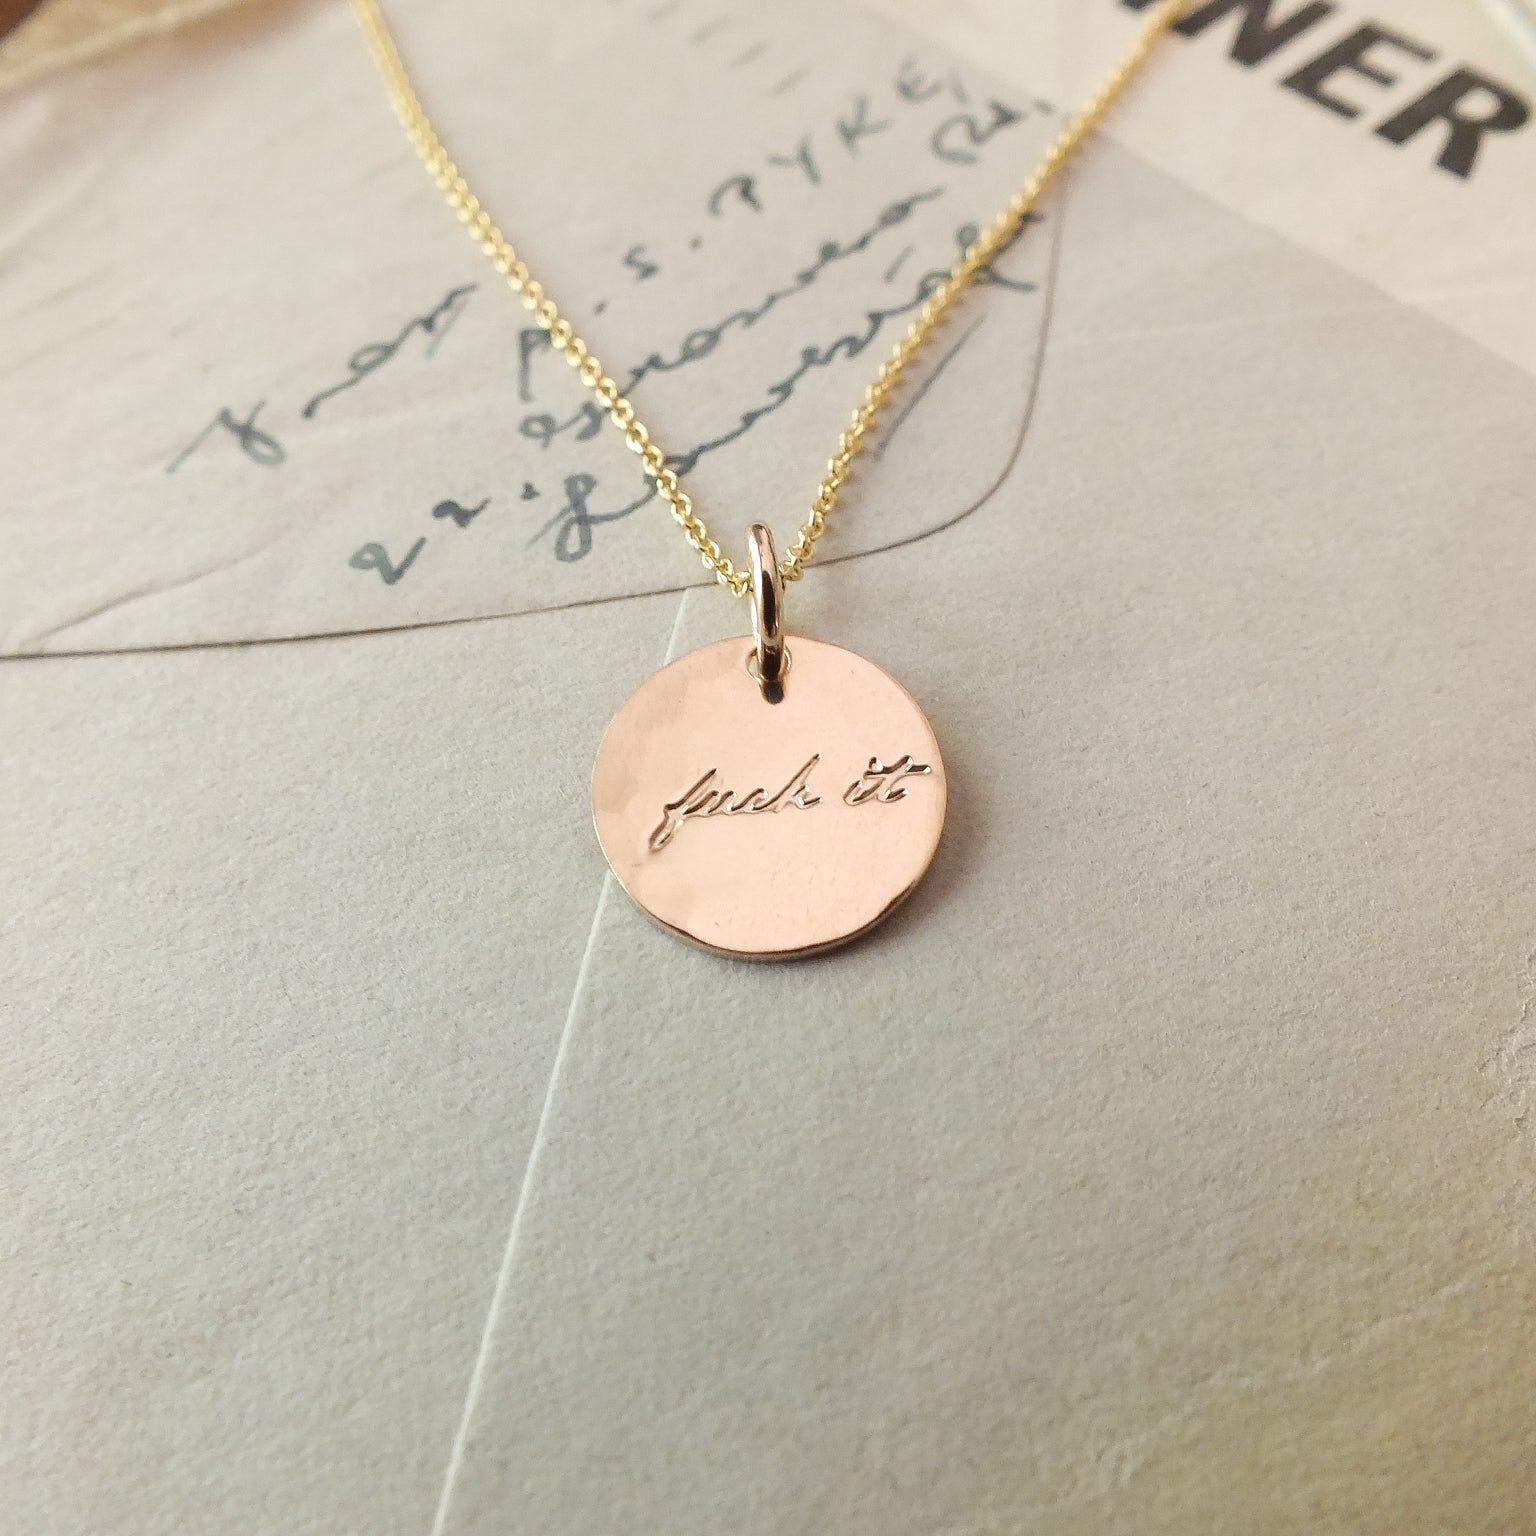 A gold-filled Fuck It Necklace by Becoming Jewelry with a circular pendant inscribed with the phrase &quot;just do it&quot; resting on a paper surface with handwritten text.